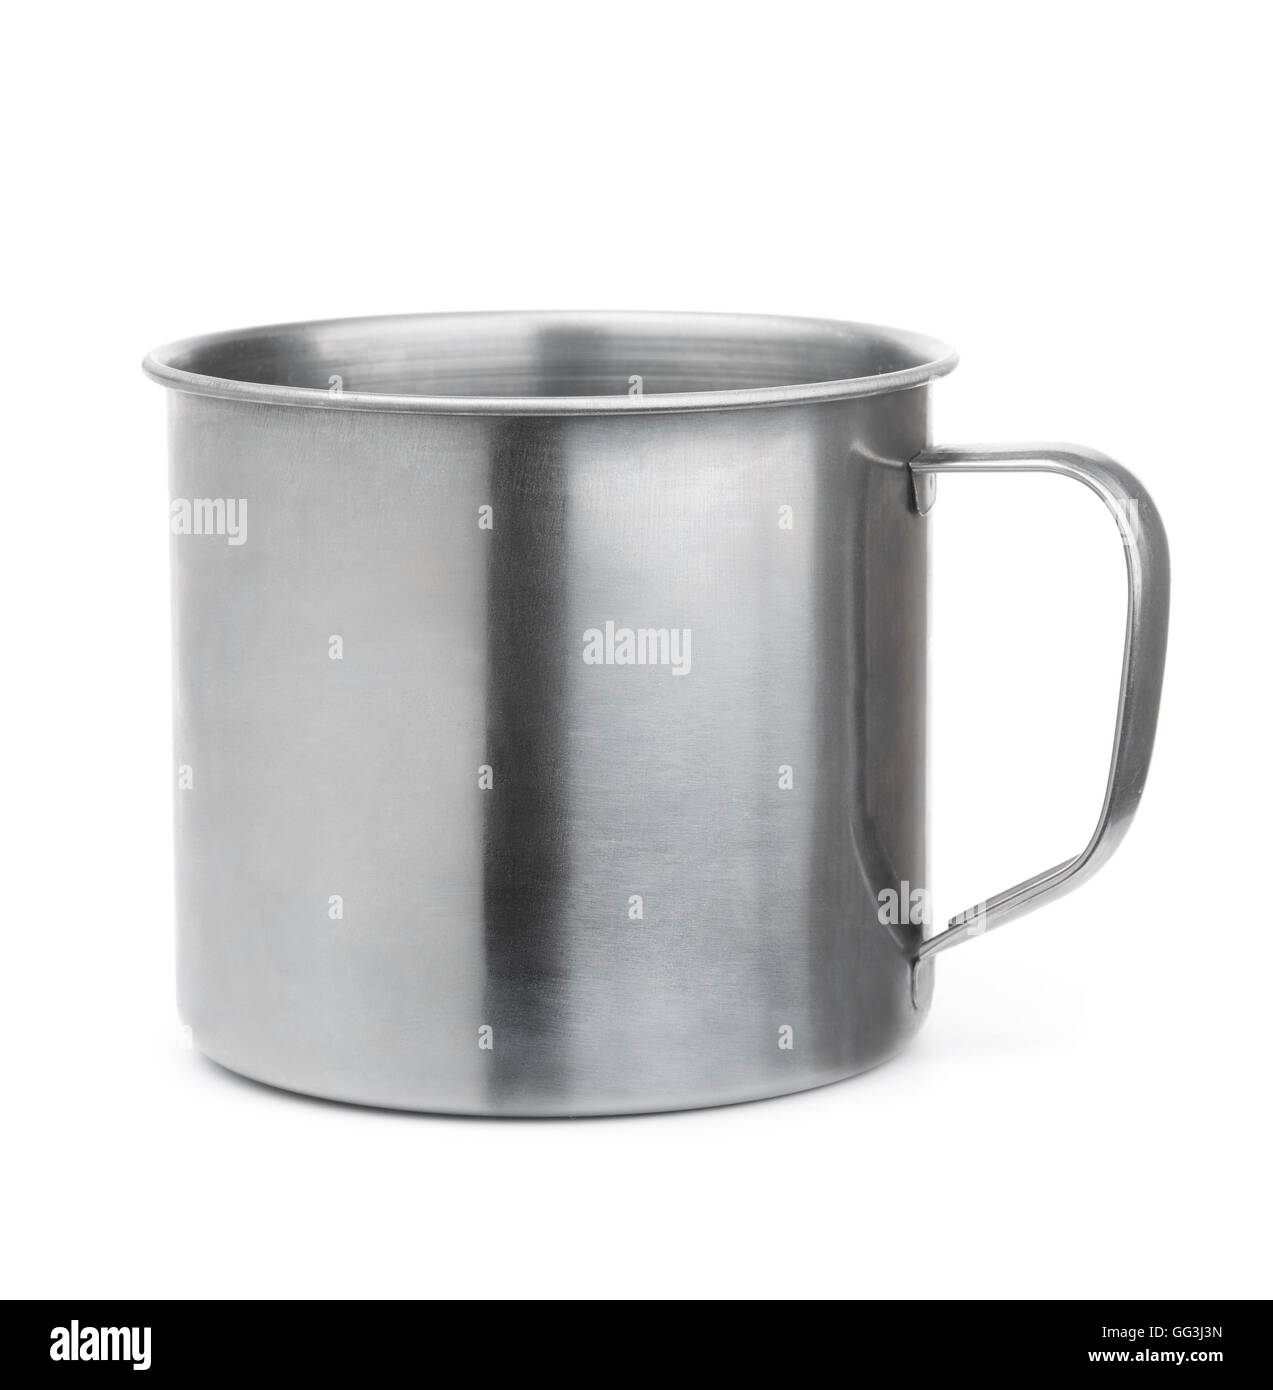 https://c8.alamy.com/comp/GG3J3N/empty-stainless-steel-cup-isolated-on-white-GG3J3N.jpg